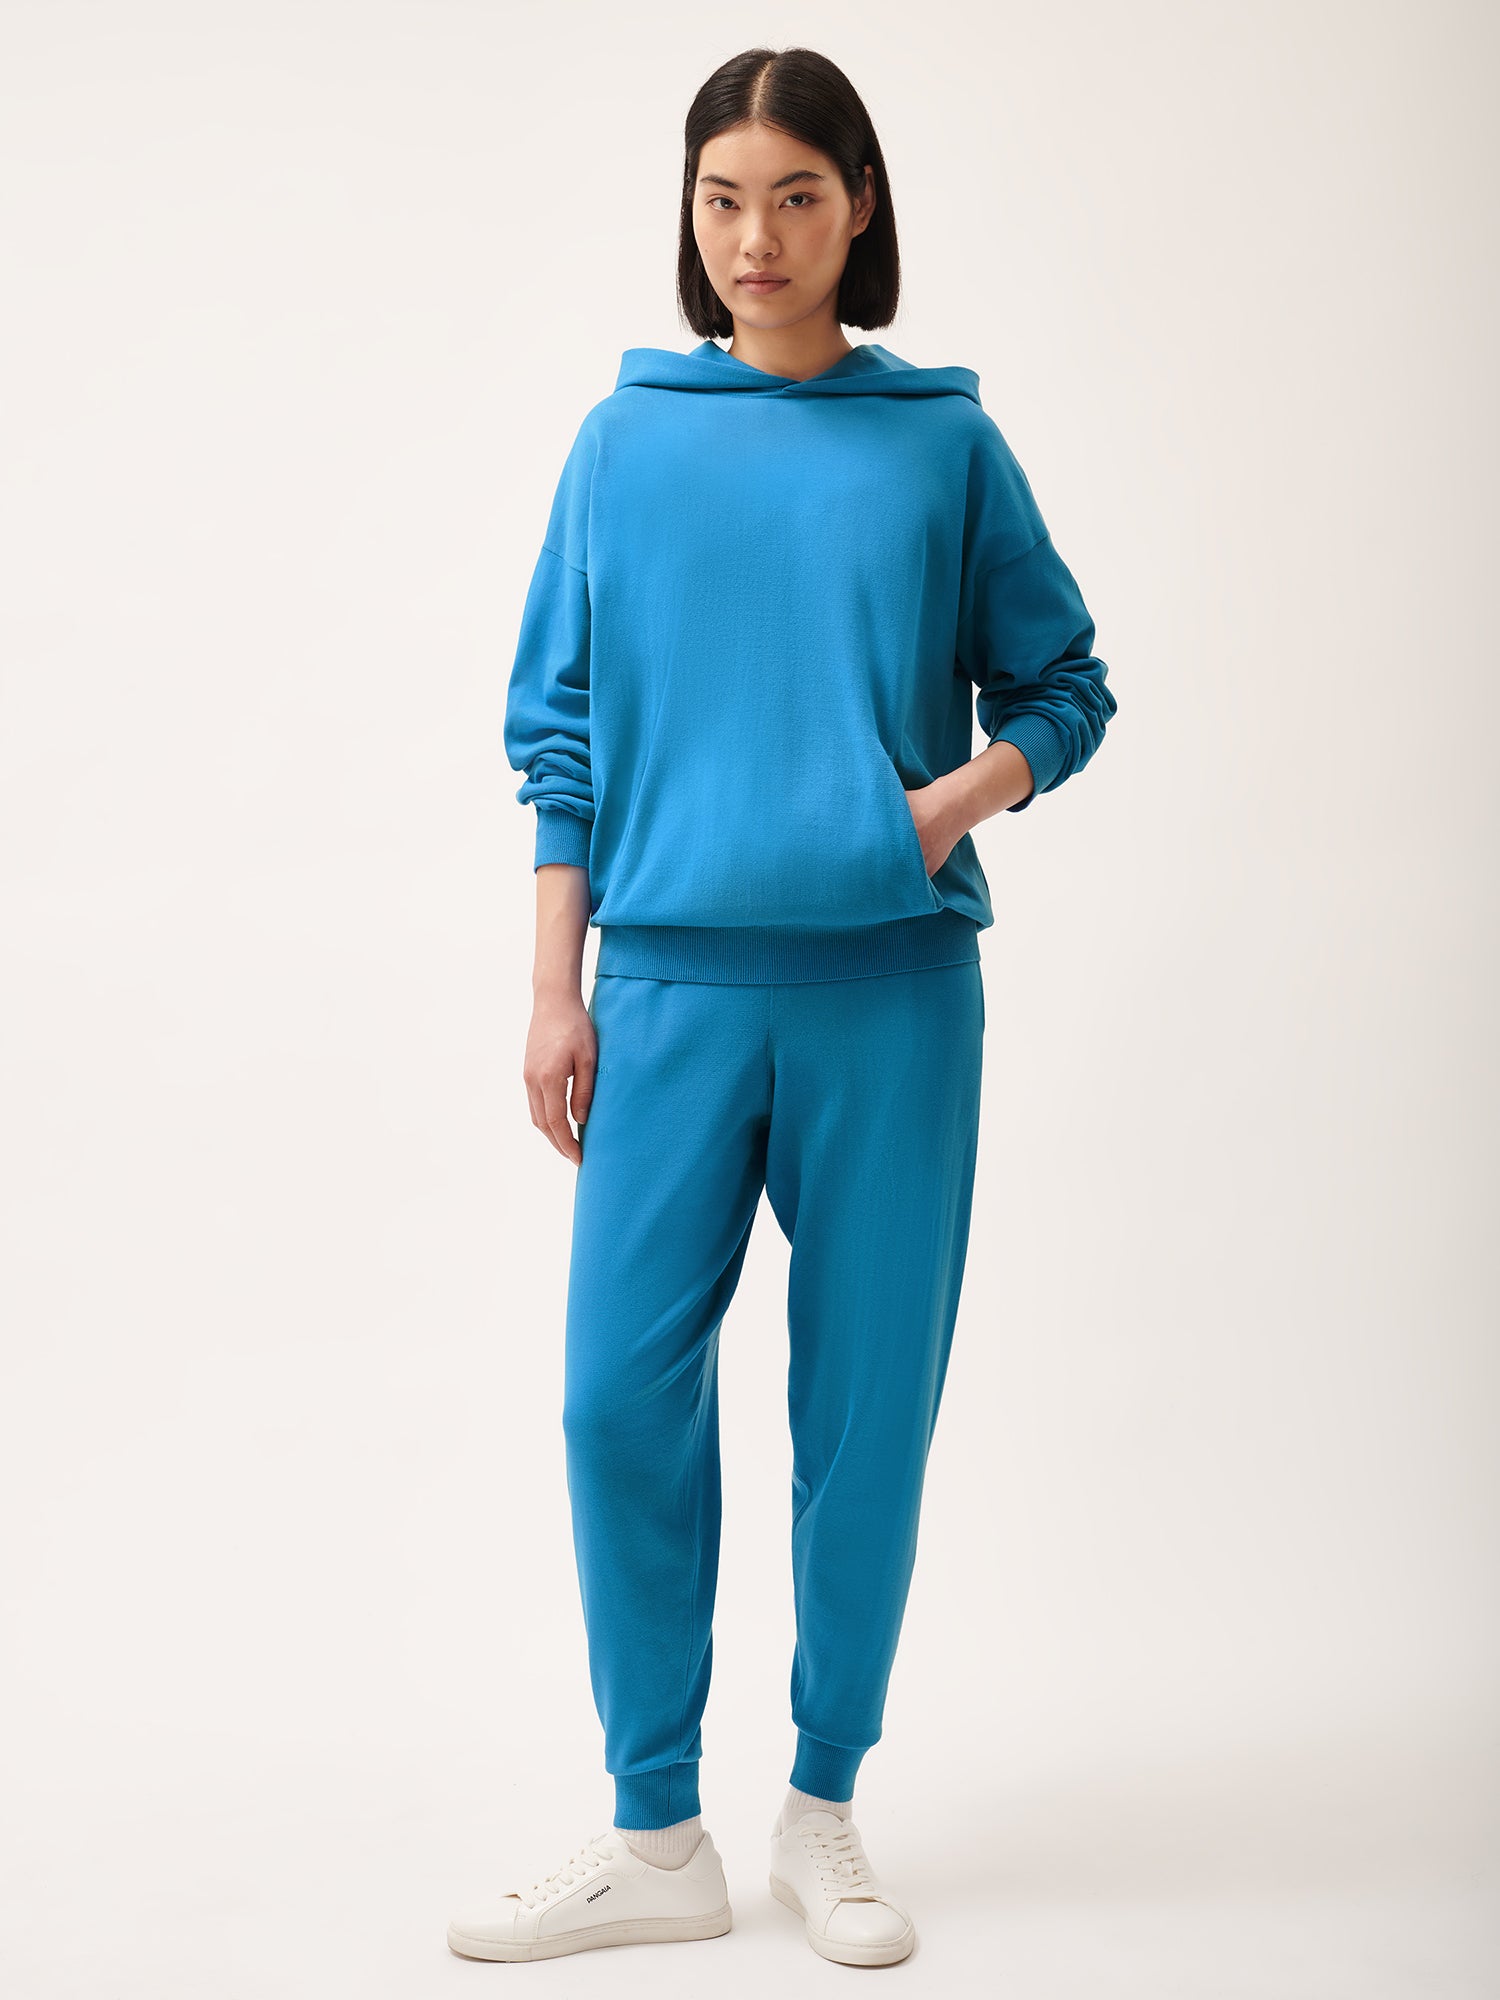 DNA_Knitted_Track_Pants_Geyser_Blue_female-1